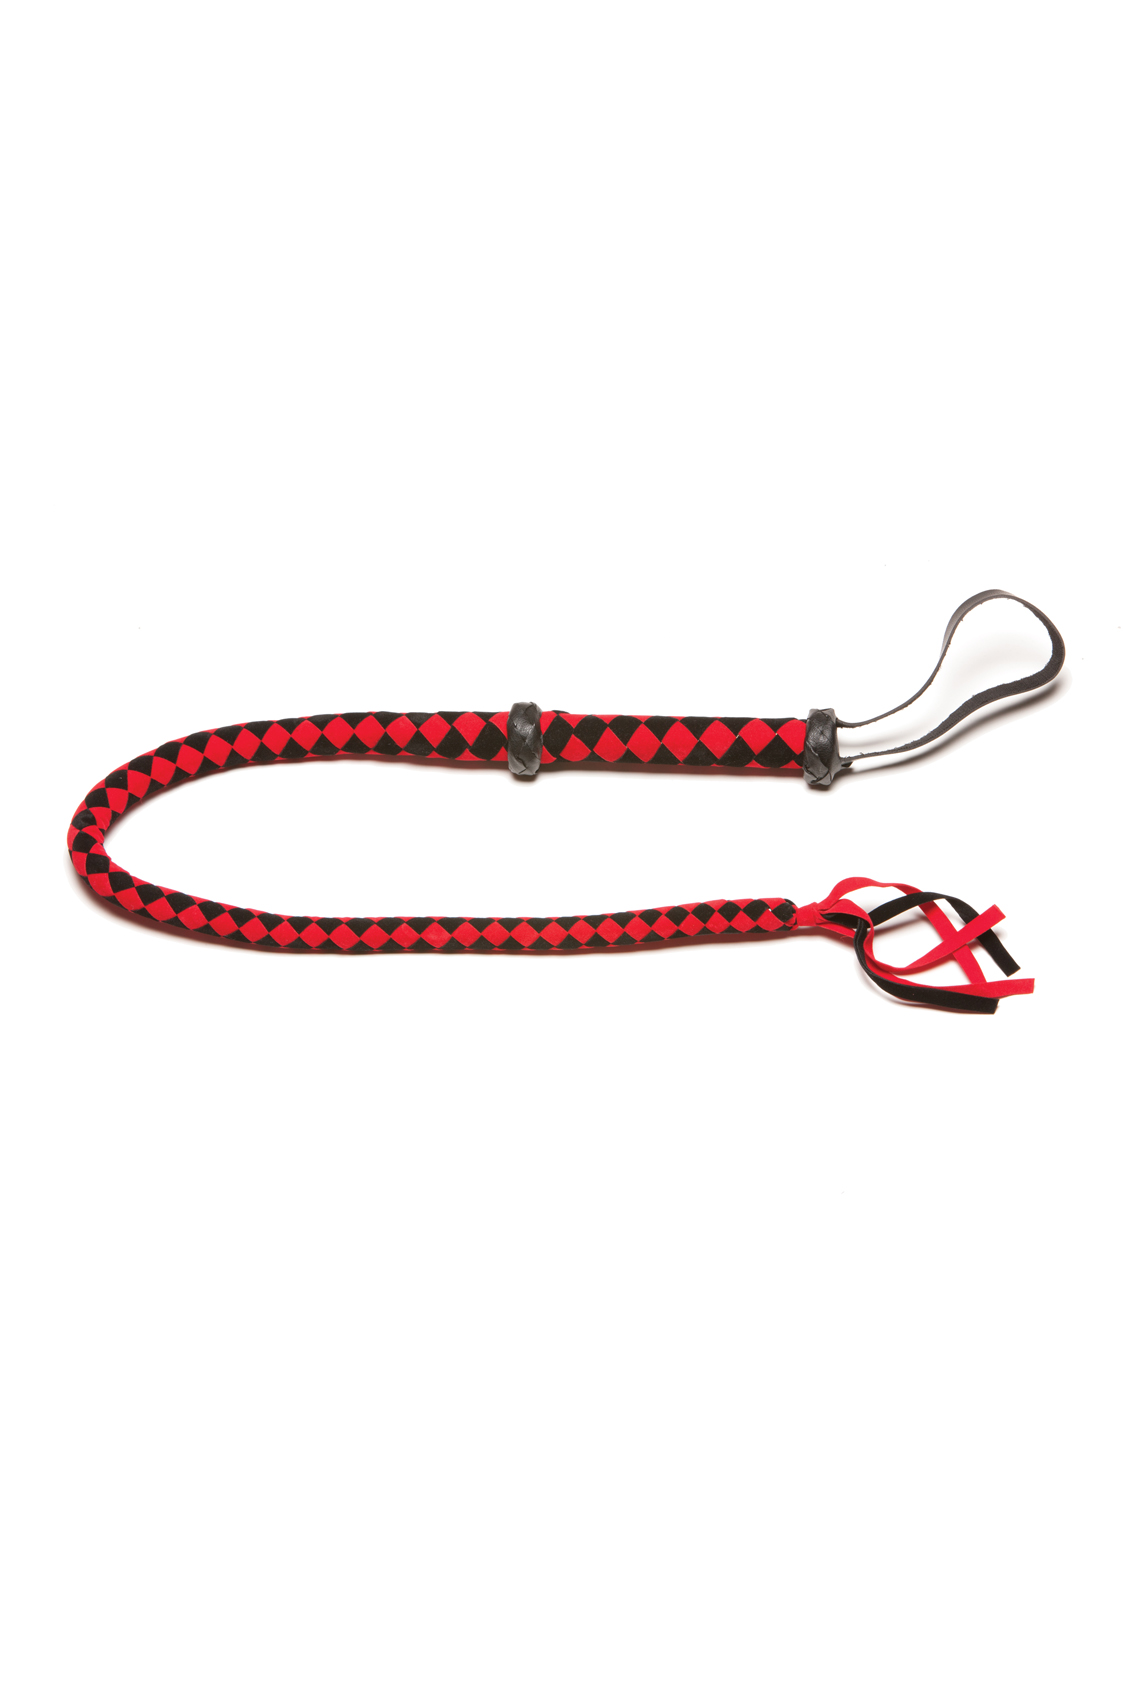 X-Play “The Master” Braided Whip 2045